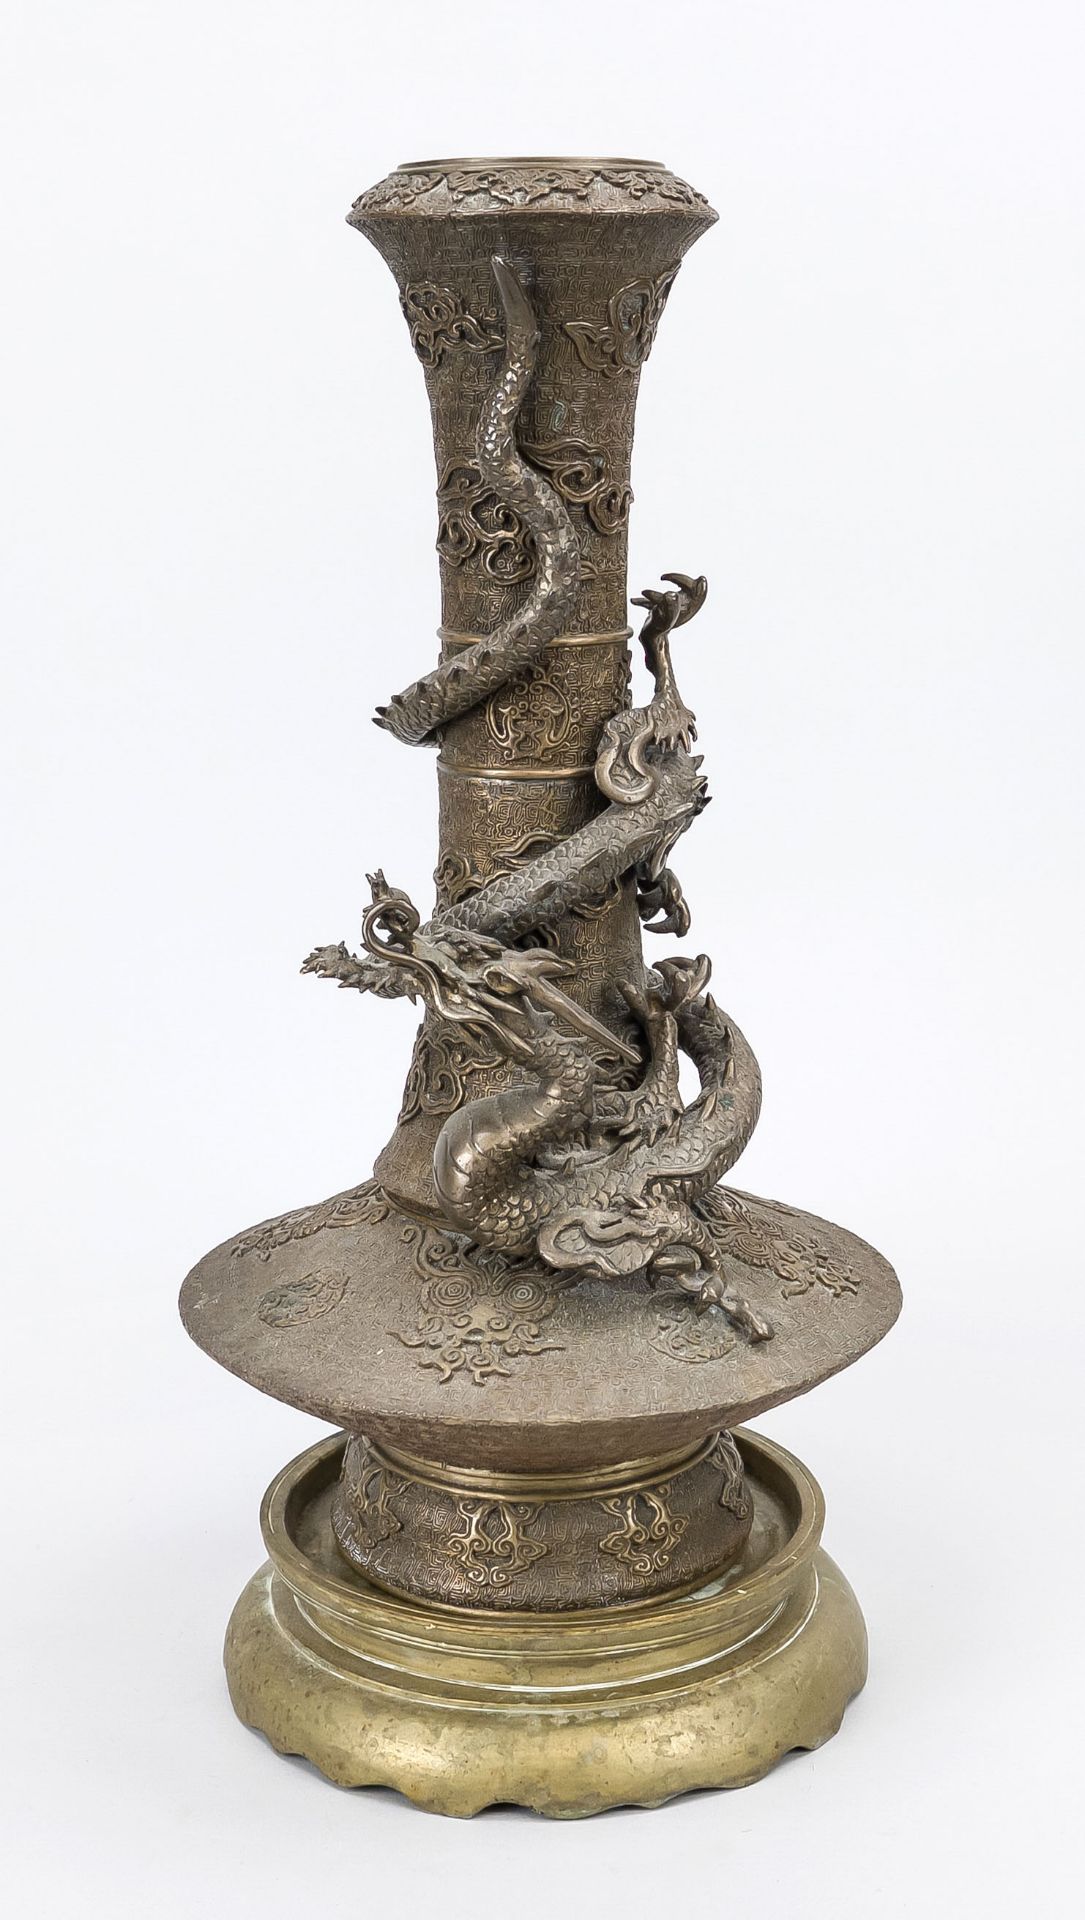 Dragon vase, Japan, probably early 20th century, bronze. A fully sculpted dragon coiling downwards